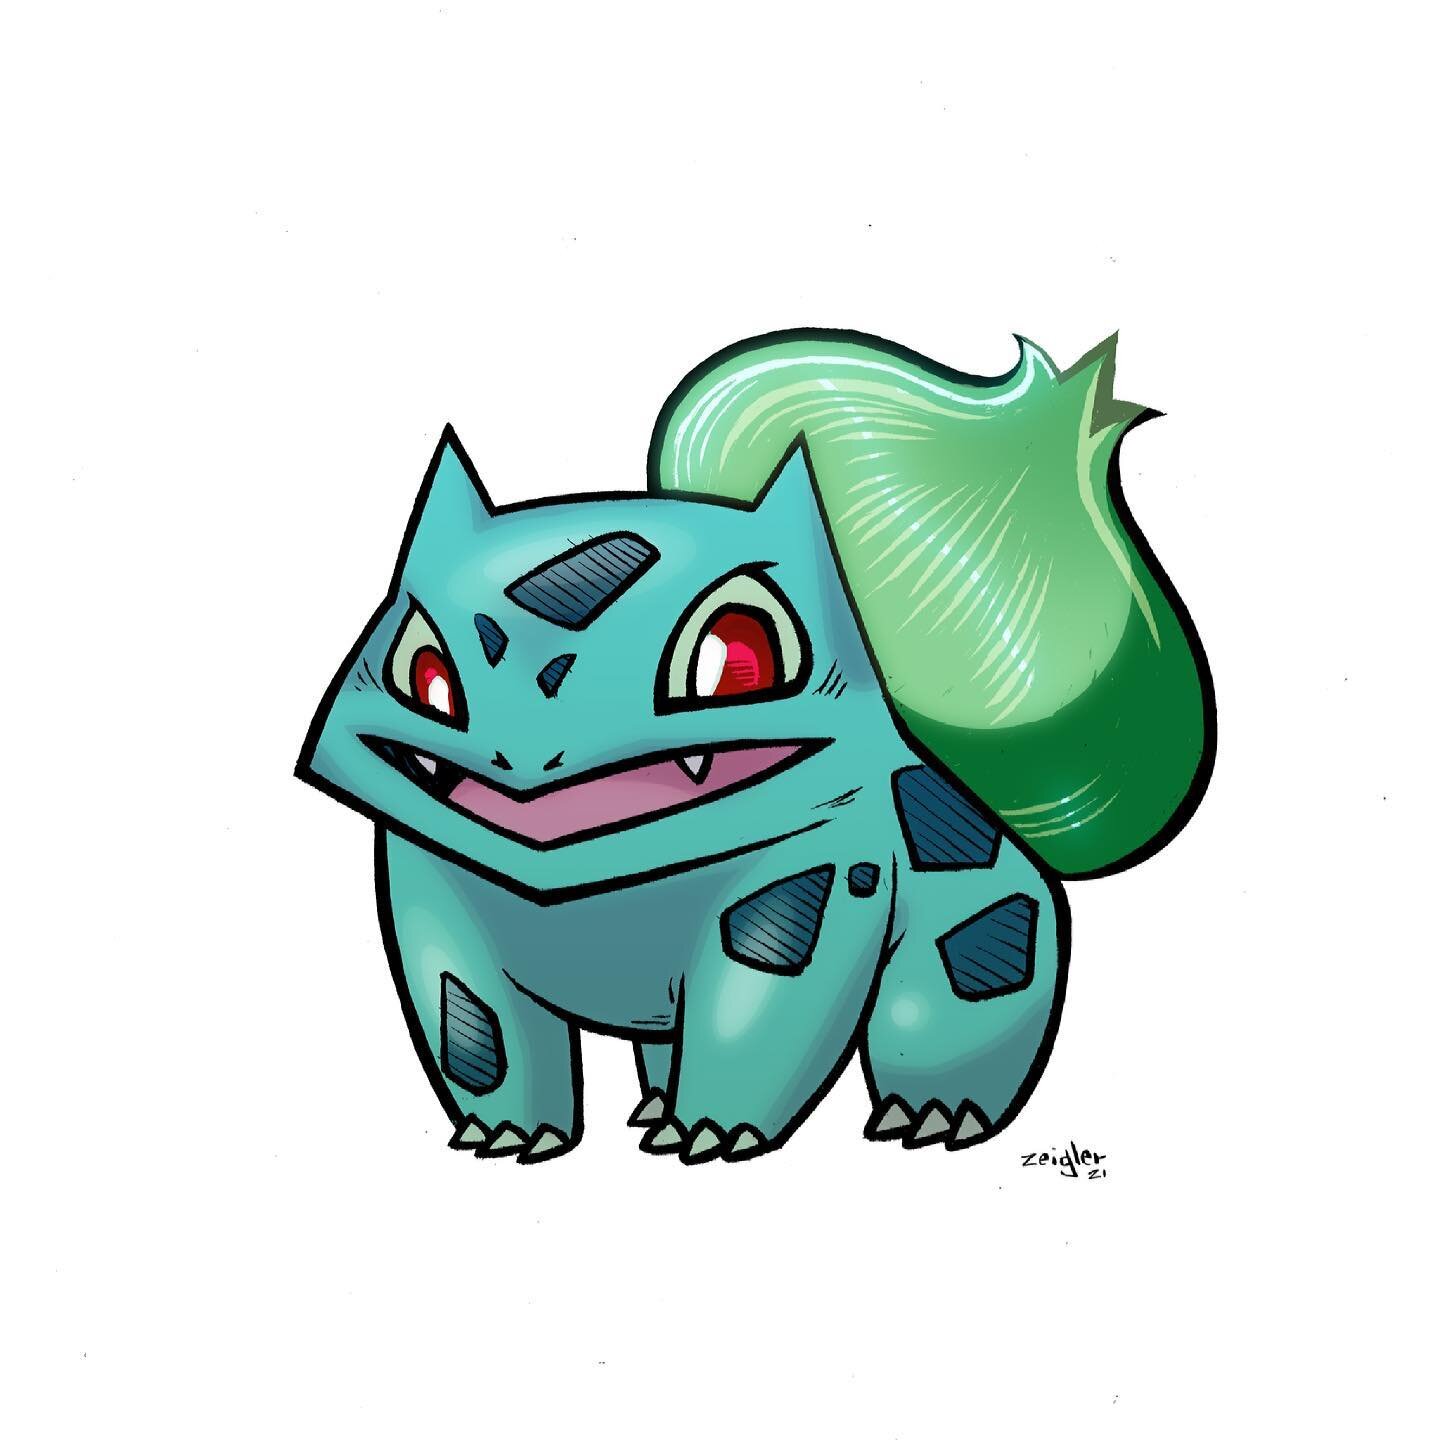 It&rsquo;s Bulbasaur! 

If you missed it be sure to check out my story next week to play ago! And yeah I&rsquo;ll say it again, Pok&eacute;mon are just really fun to draw! 

Next one might not be so easy!
.
.
.
#bulbasaur #bulbflowers #pokedex #pokem